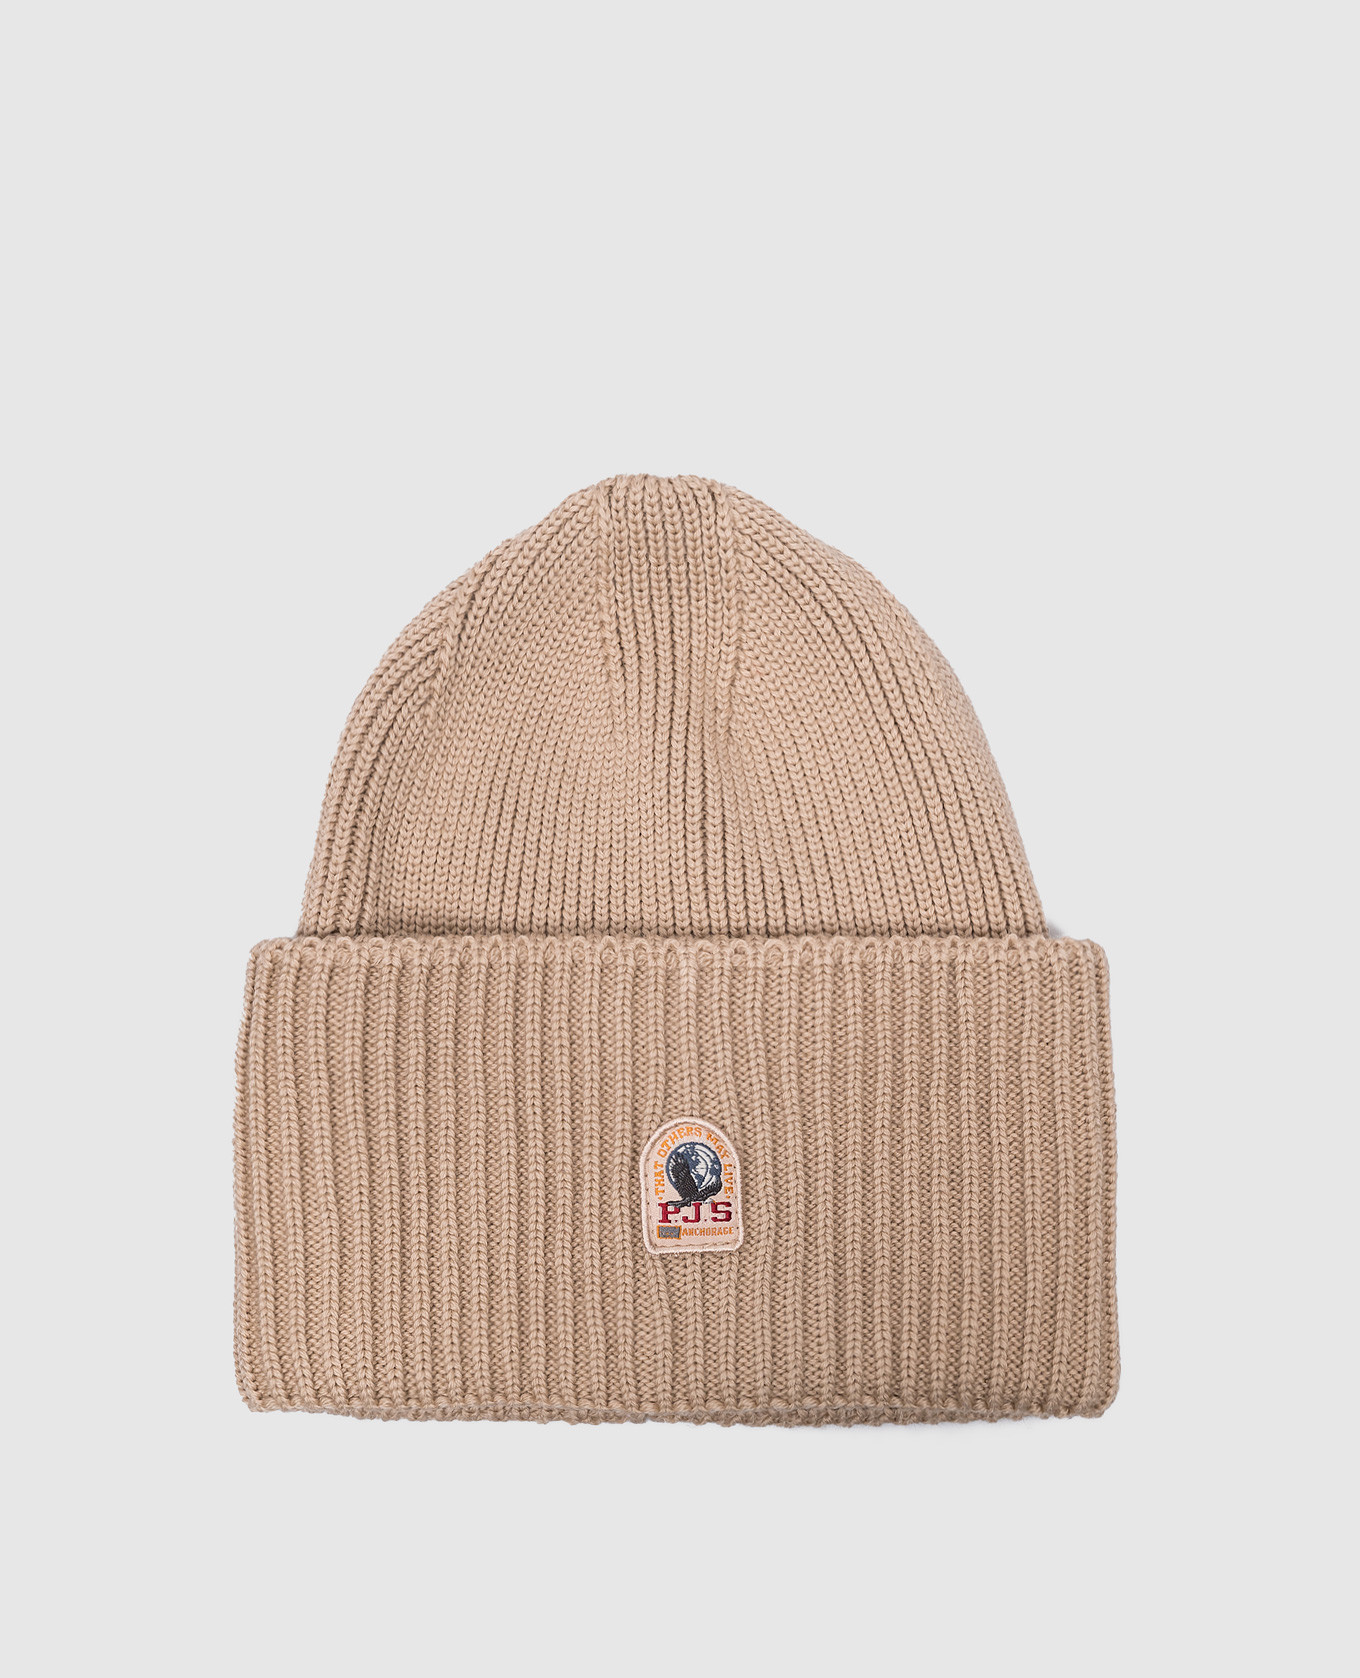 Basic brown wool cap with logo patch